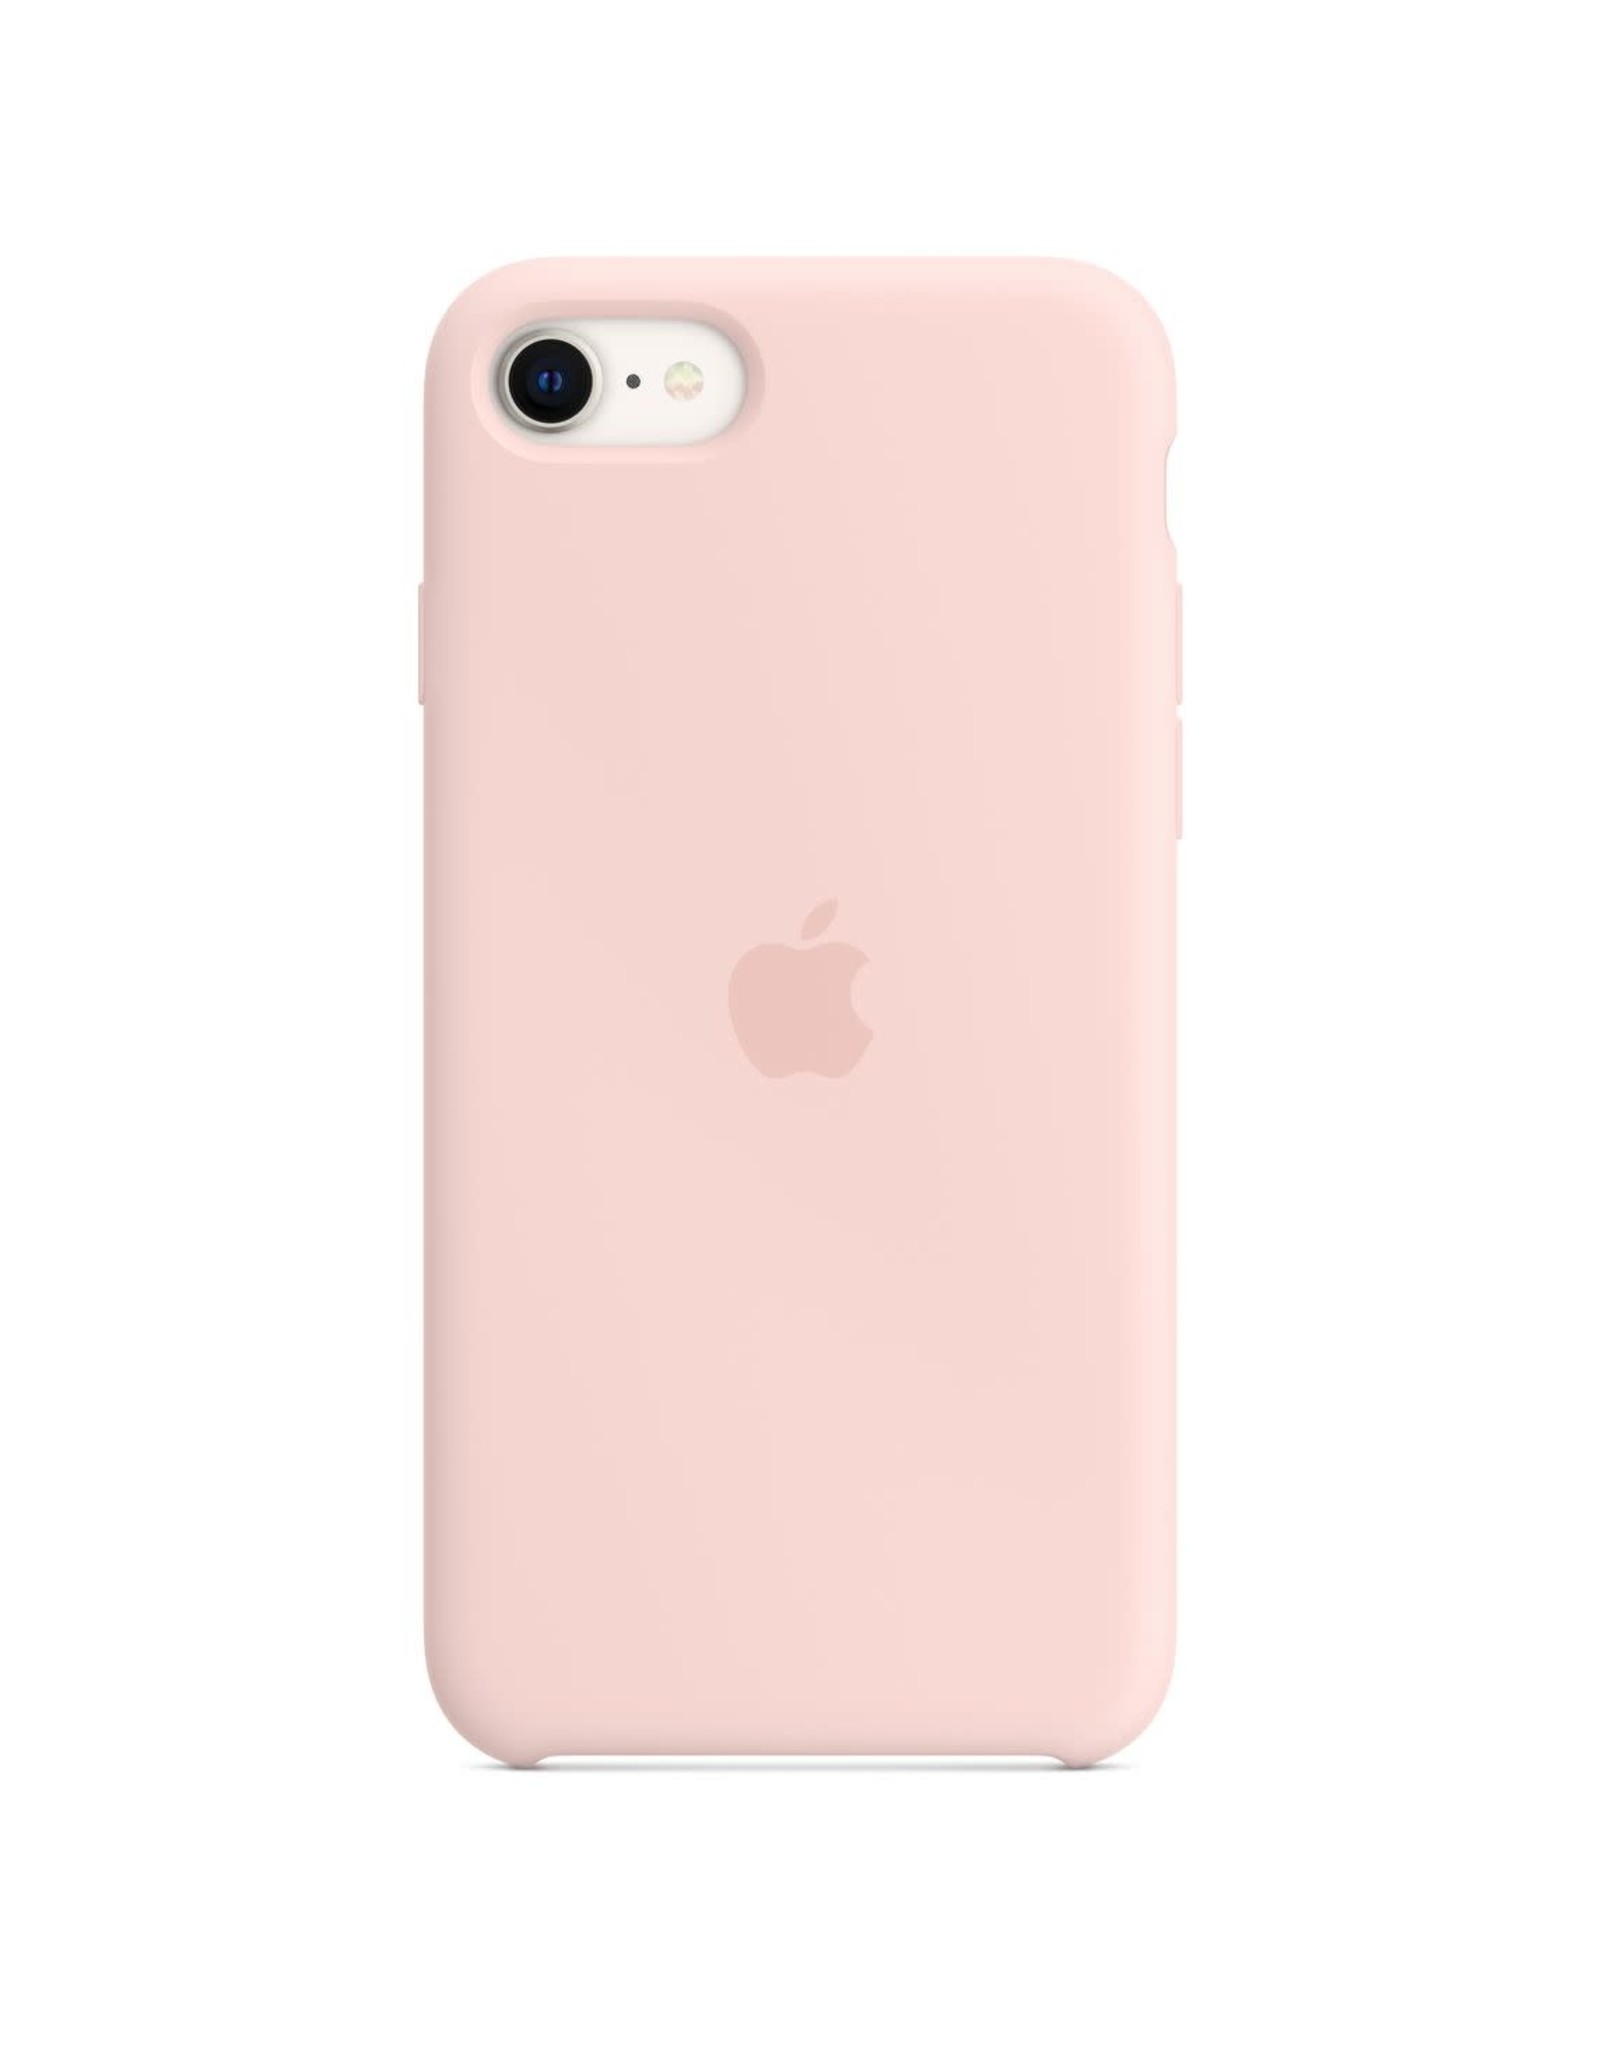 Apple Apple iPhone SE Silicone Case - Chalk Pink